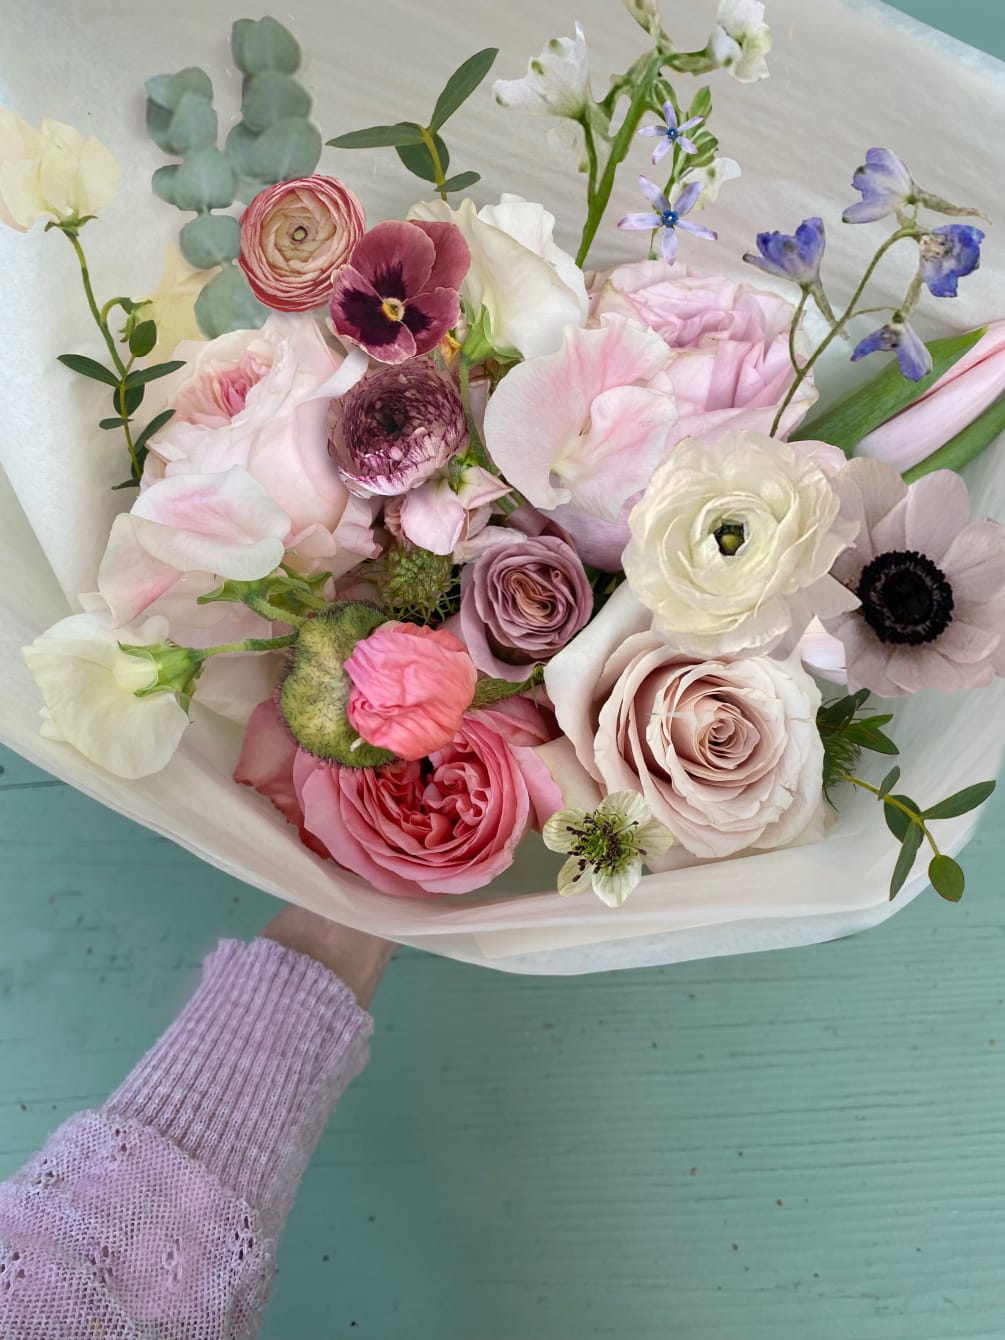 Soft and breathtaking bundle of the most beautiful, wild, romantic, fresh stems